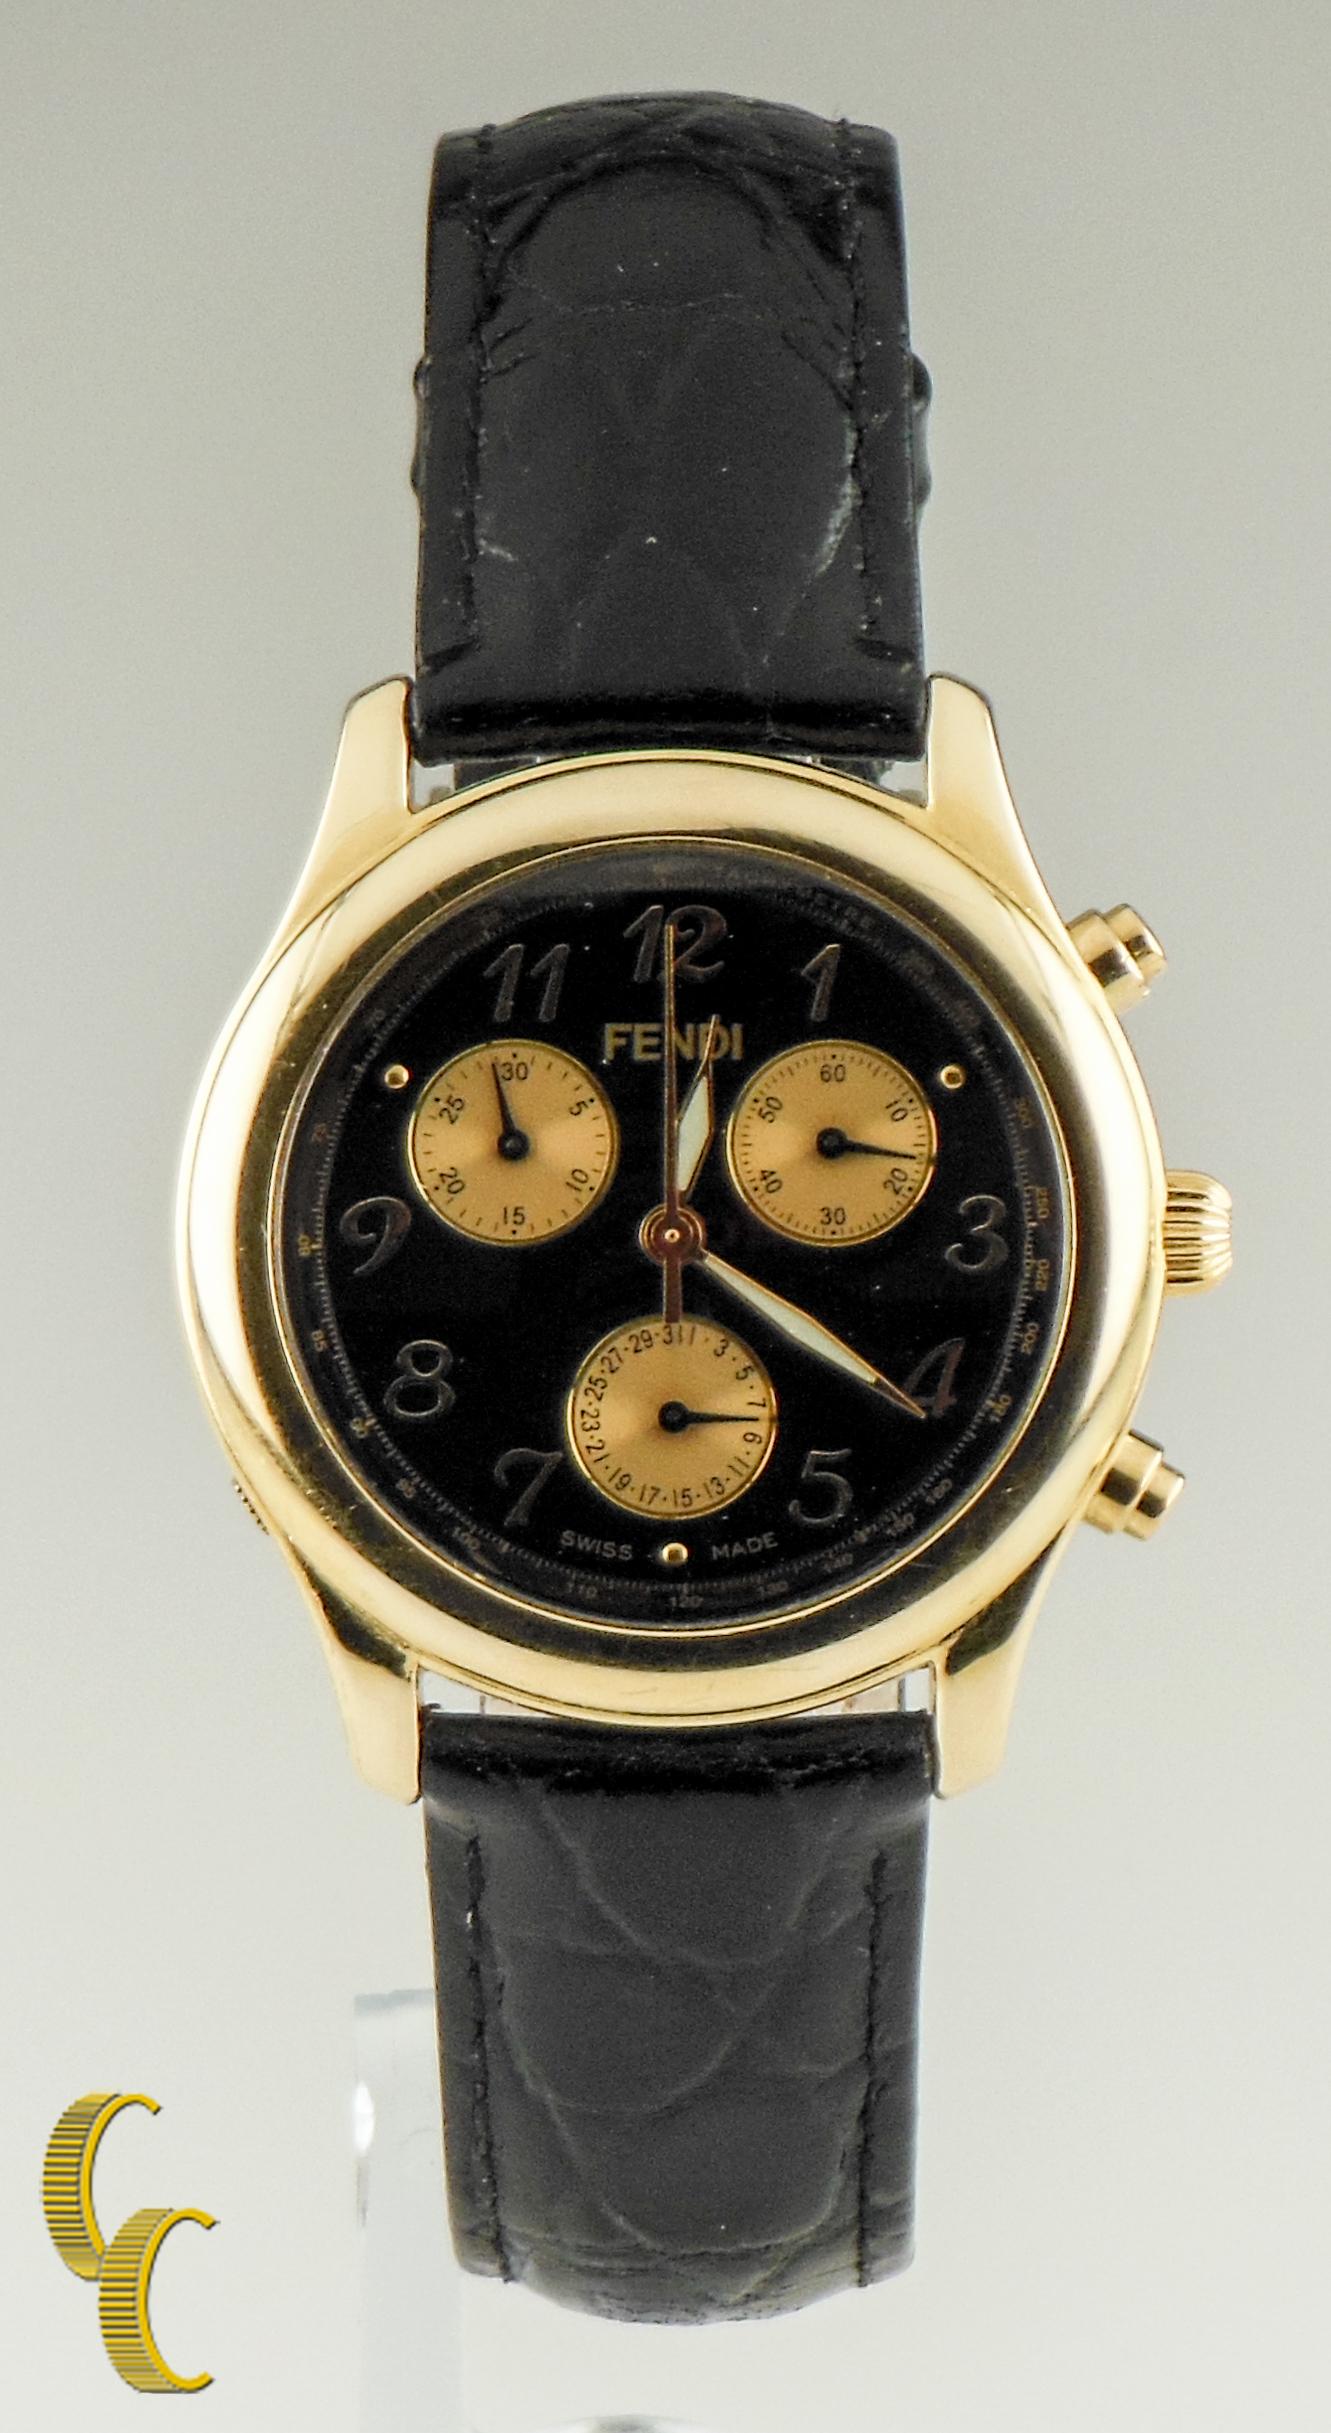 Fendi 18K Yellow Gold Chronograph Watch w/ Leather Band

Model: Chronograph
Serial #: 000-270-062

18K Yellow Gold Round Case
Case Size= 35mmmm 
Lug-to-Lug Distance = 40 mm
Thickness = 7 mm

Black Dial with Three Gold Subdials and Luminescent